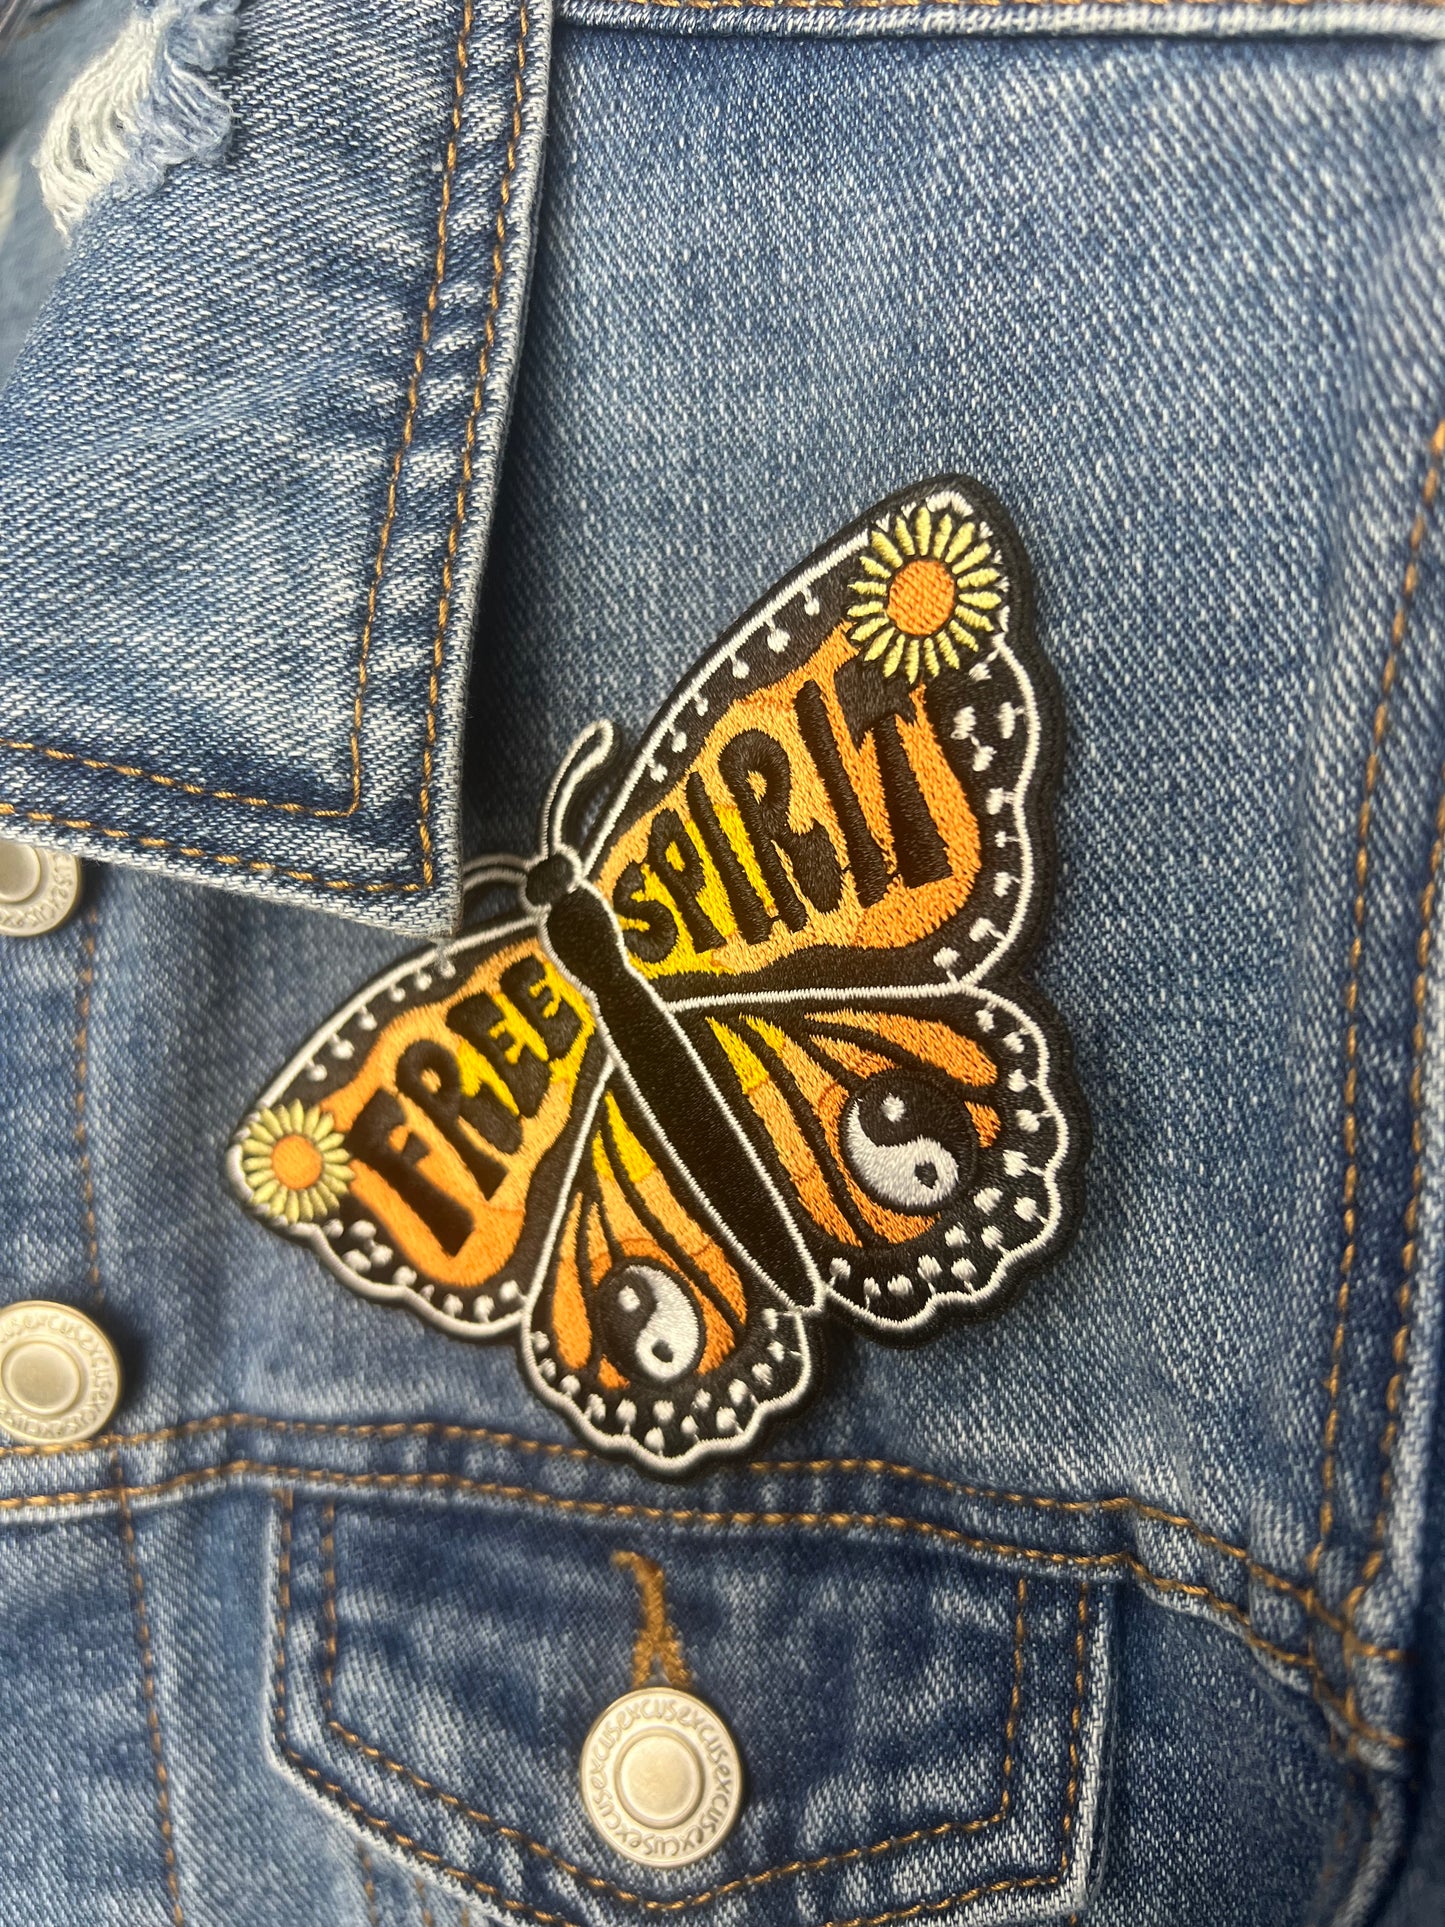 Free Spirit Butterfly Patch